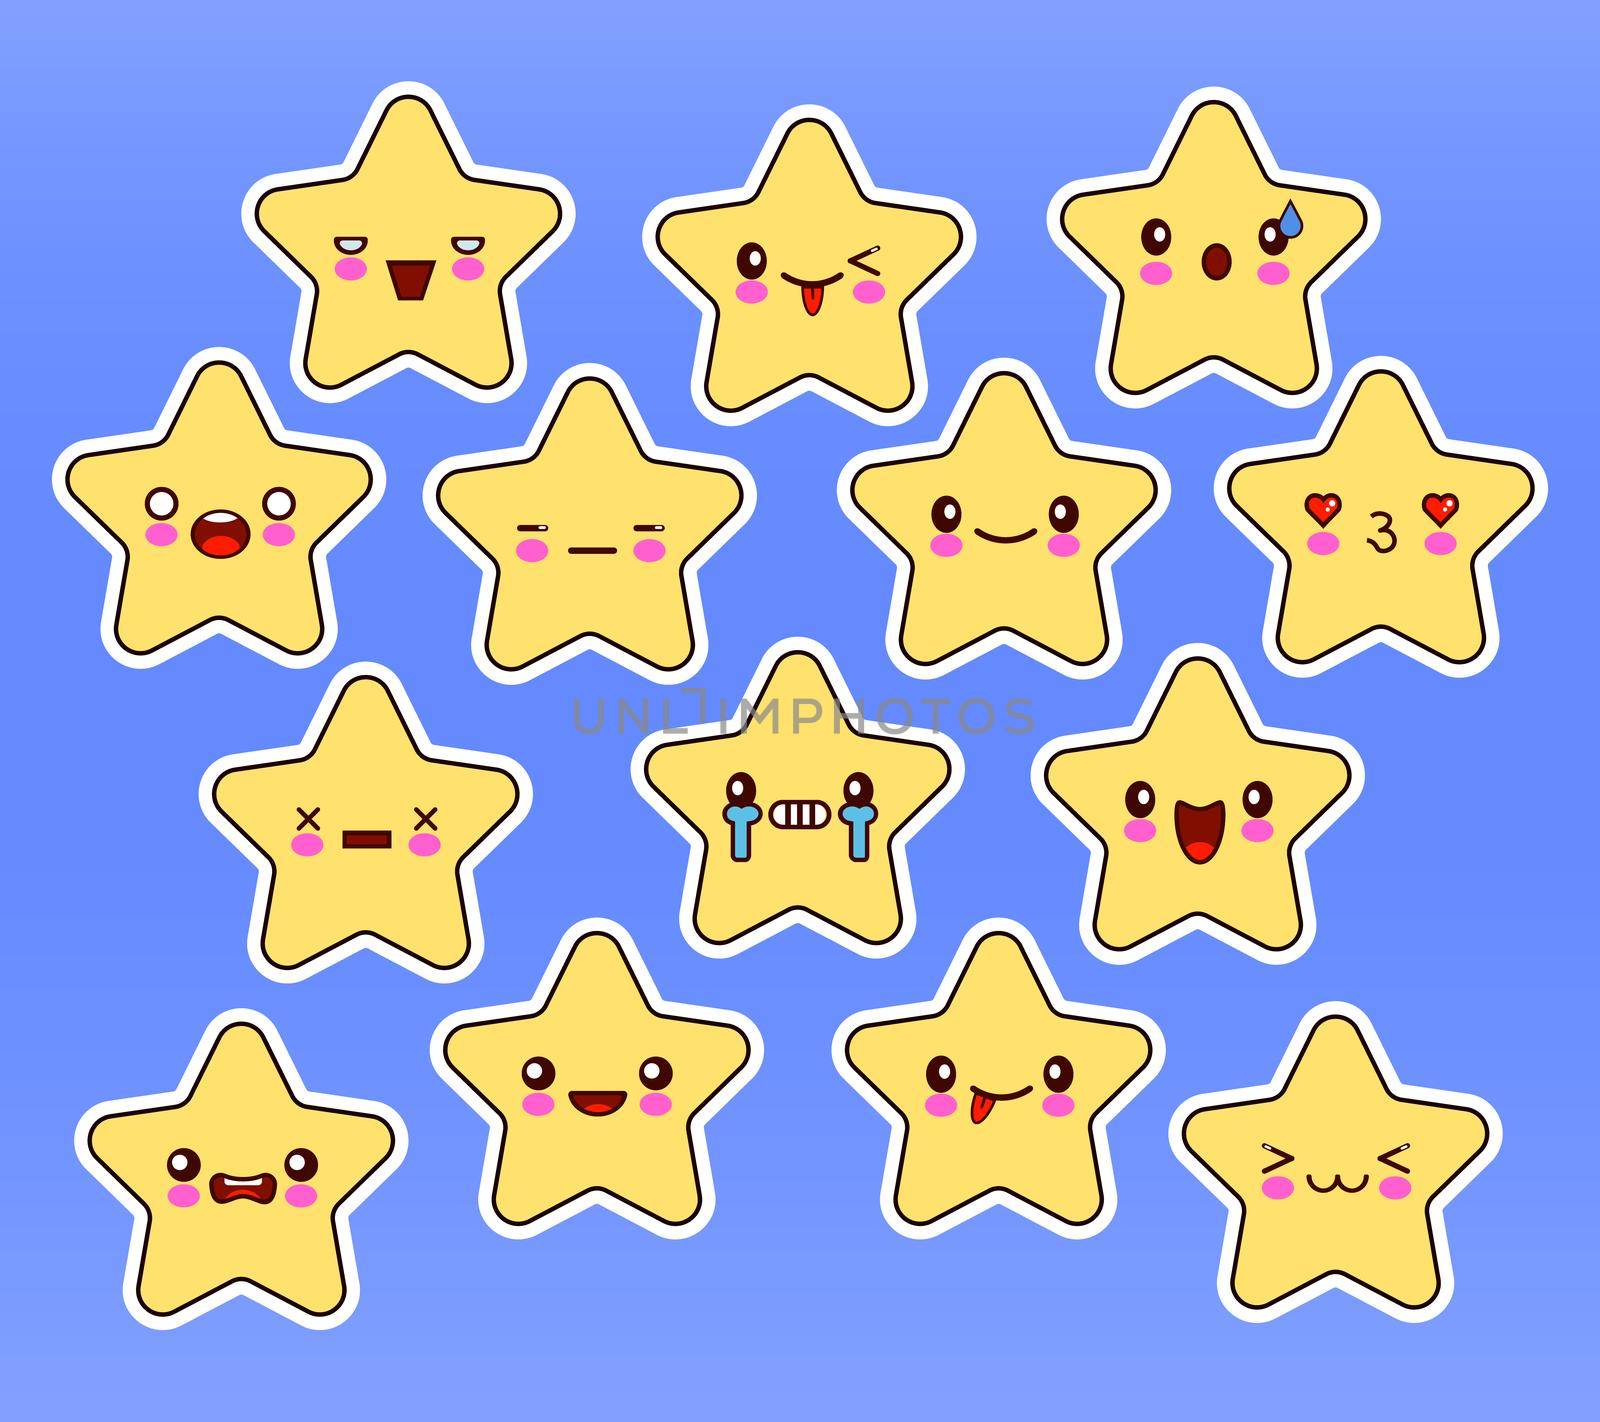 Kawaii stars set, face with eyes, yellow color on blue background. by Alxyzt